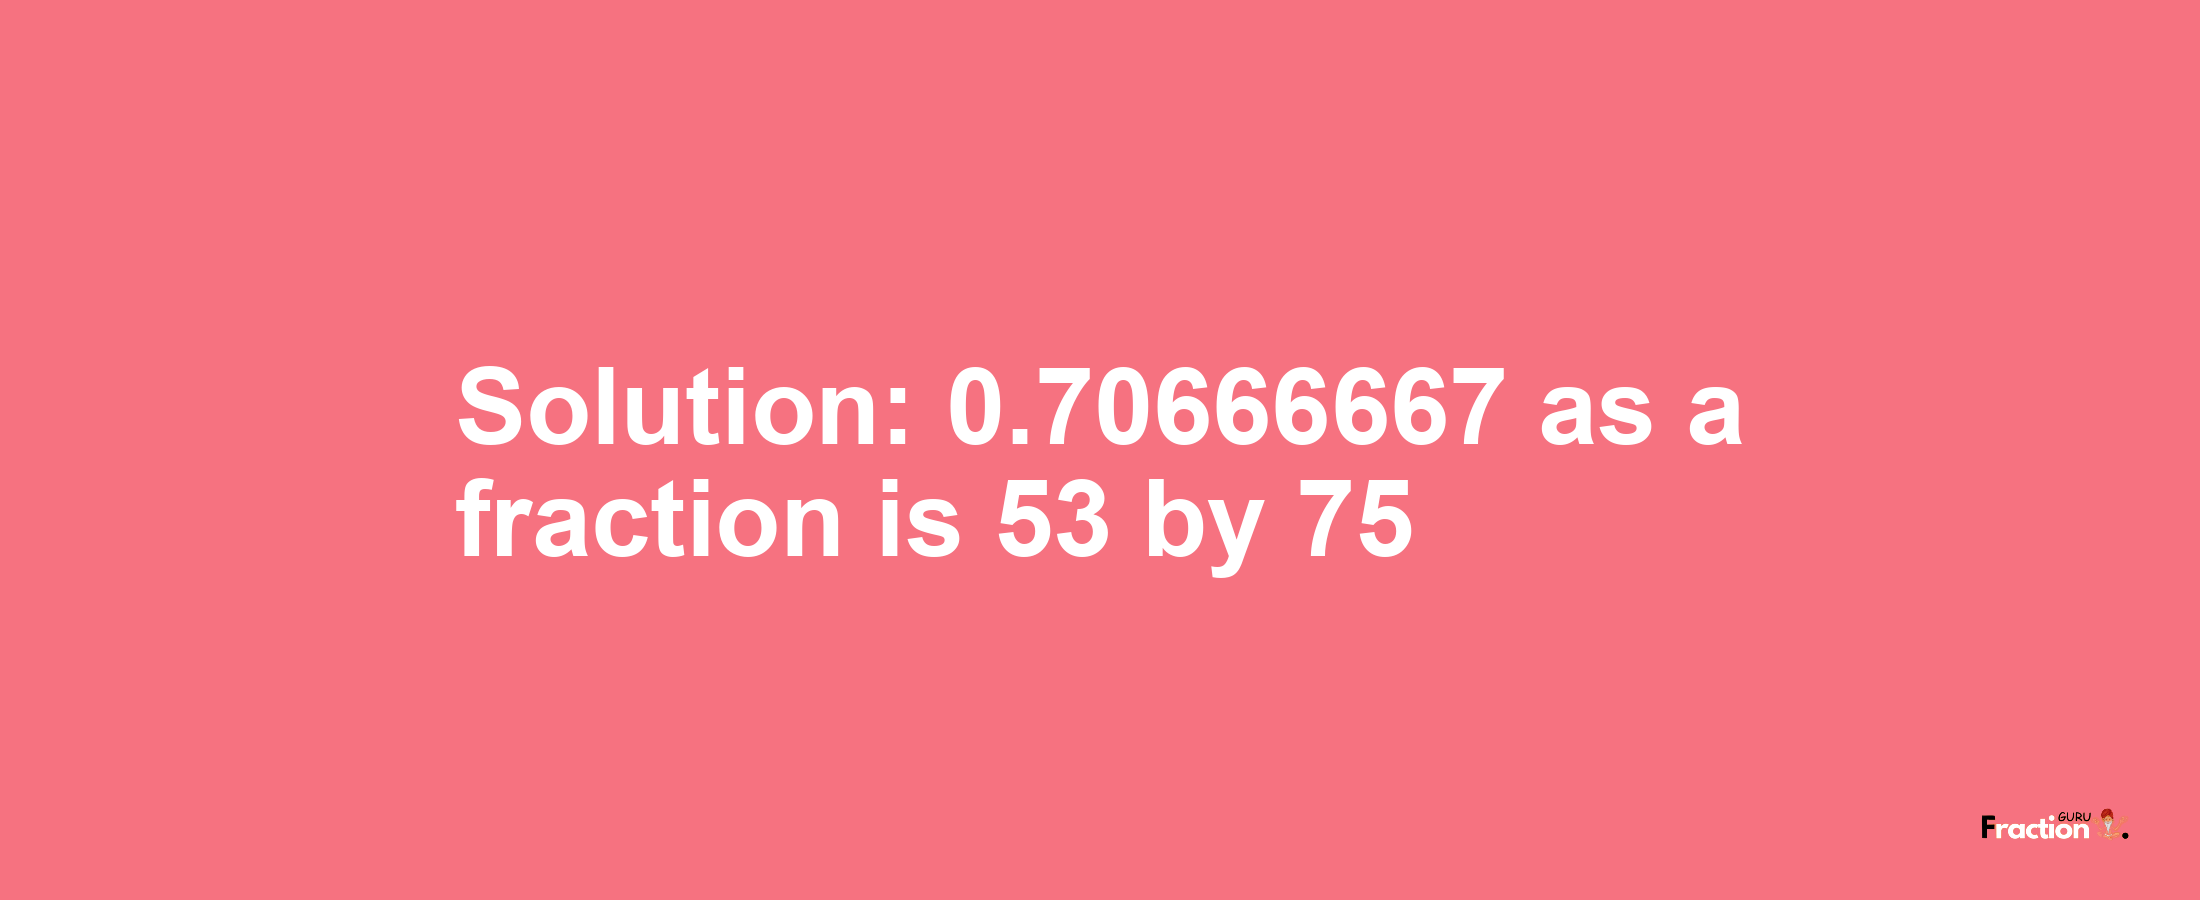 Solution:0.70666667 as a fraction is 53/75